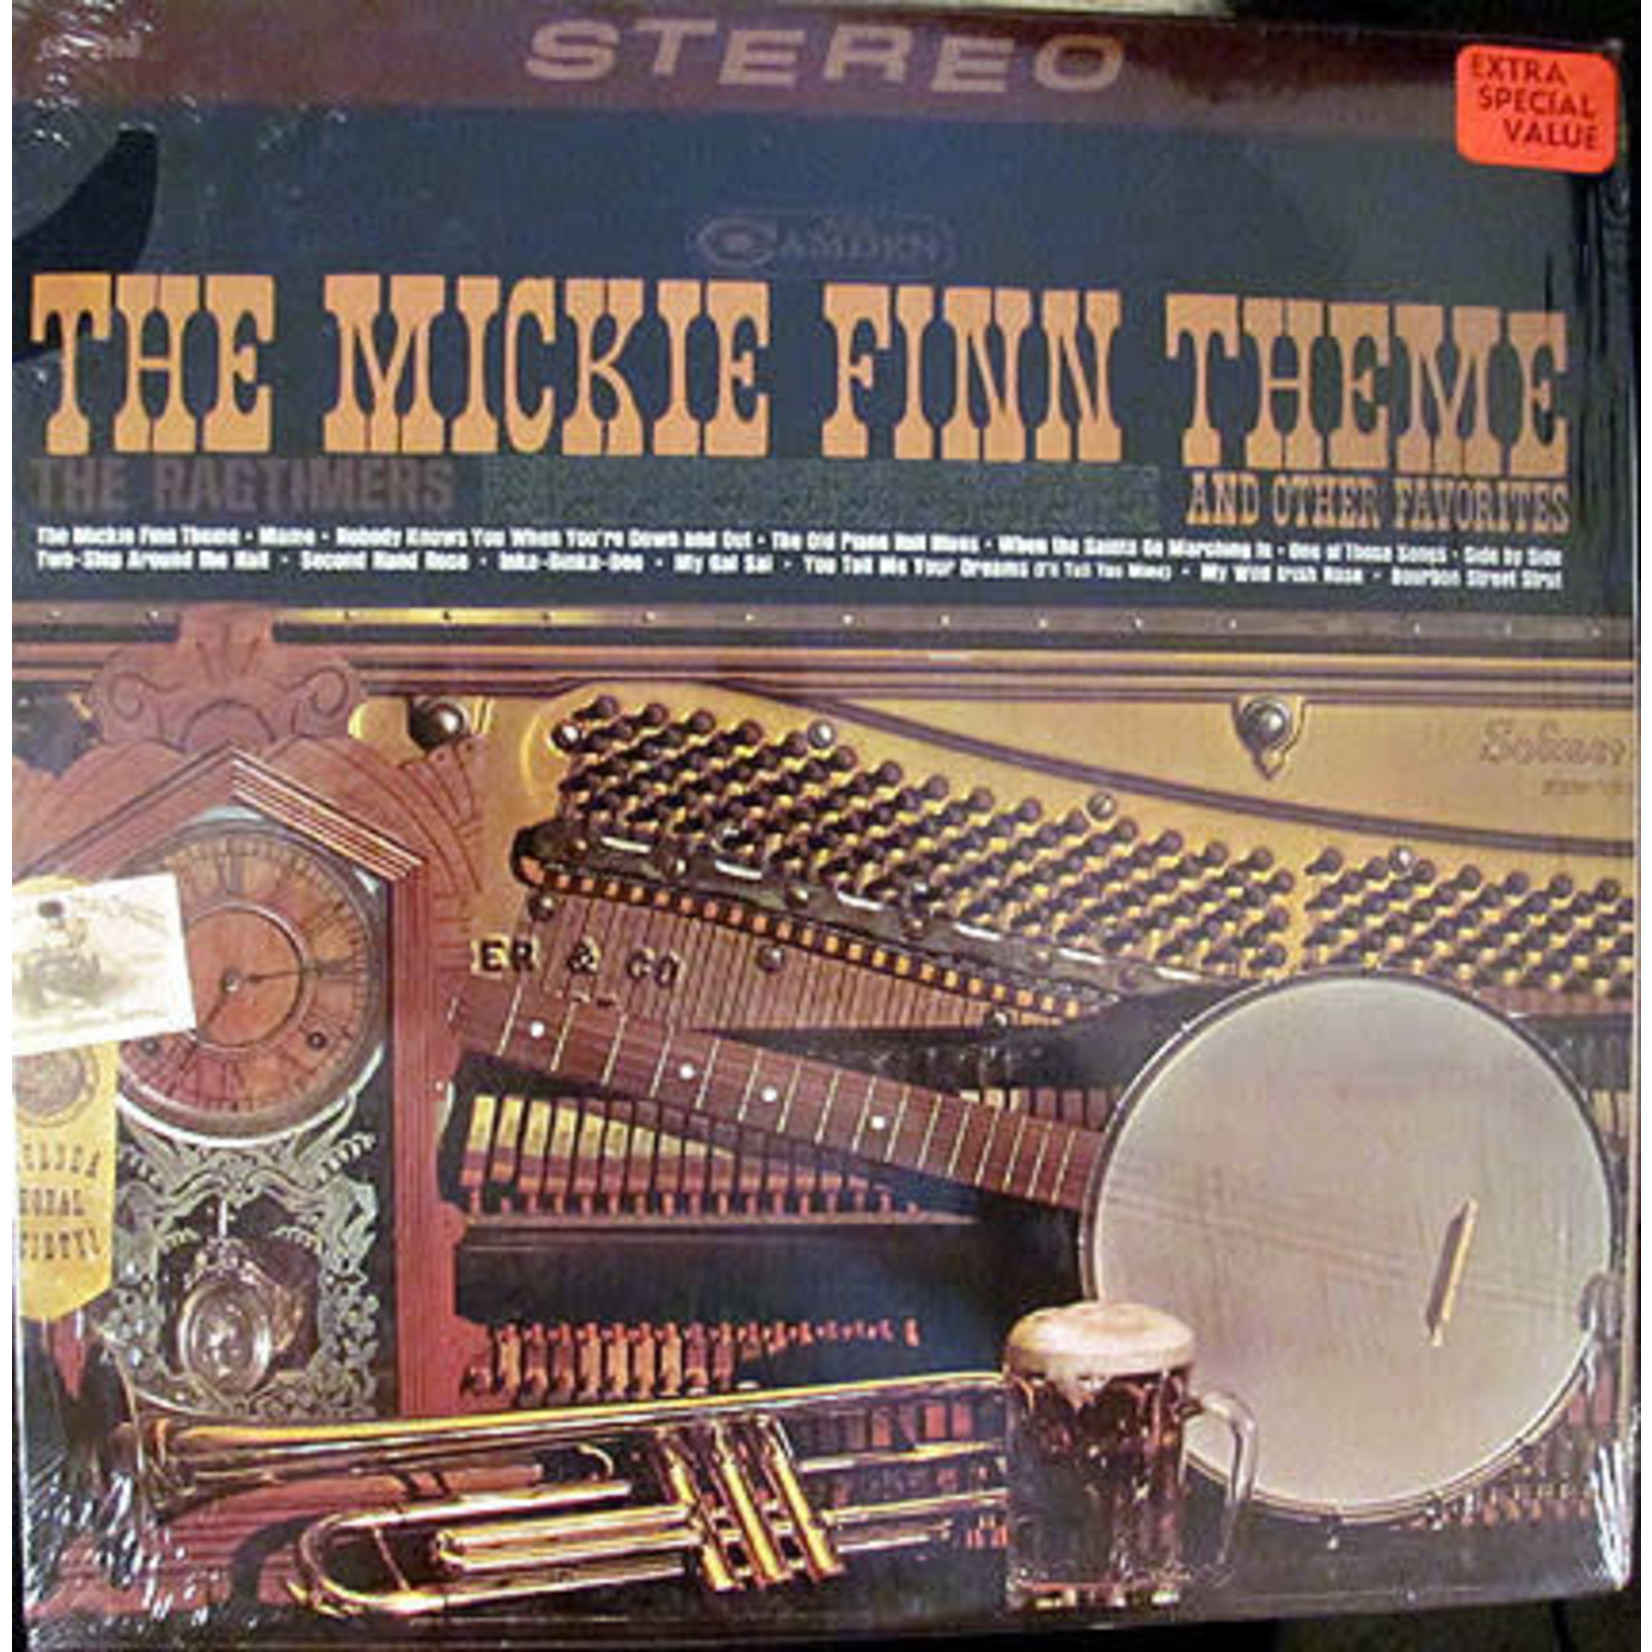 The Ragtimers The Ragtimers – The Mickie Finn Theme And Other Favorites (VG)